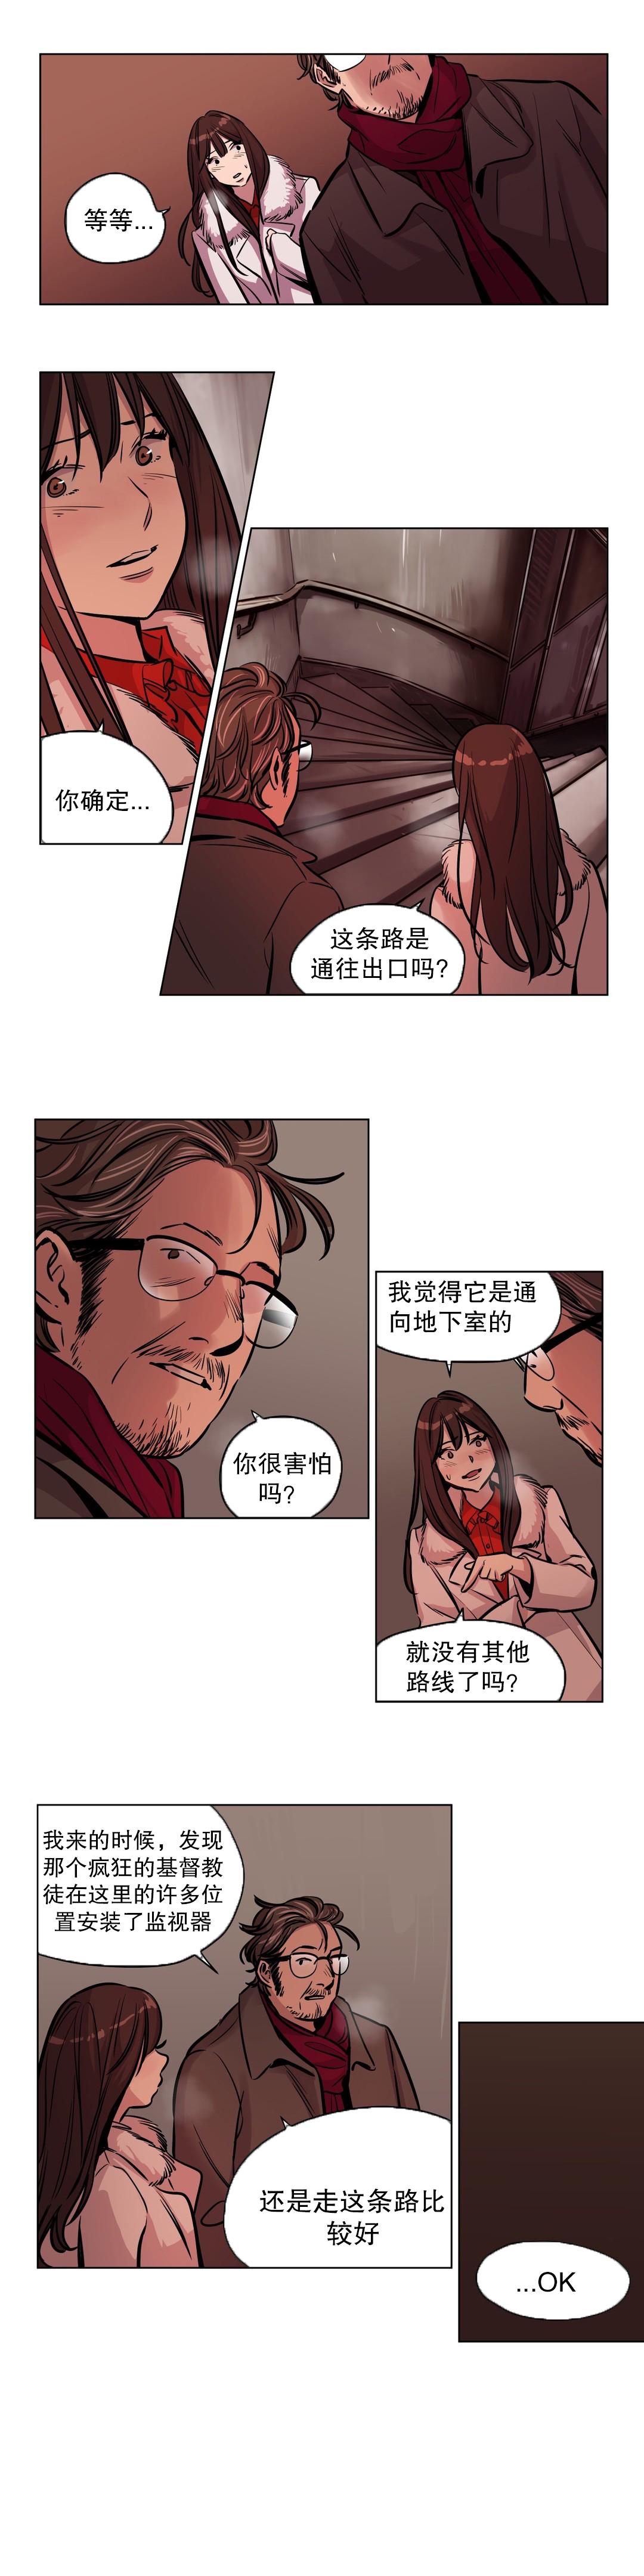 [Ramjak] 赎罪营(Atonement Camp) Ch.50-51 (Chinese) 16